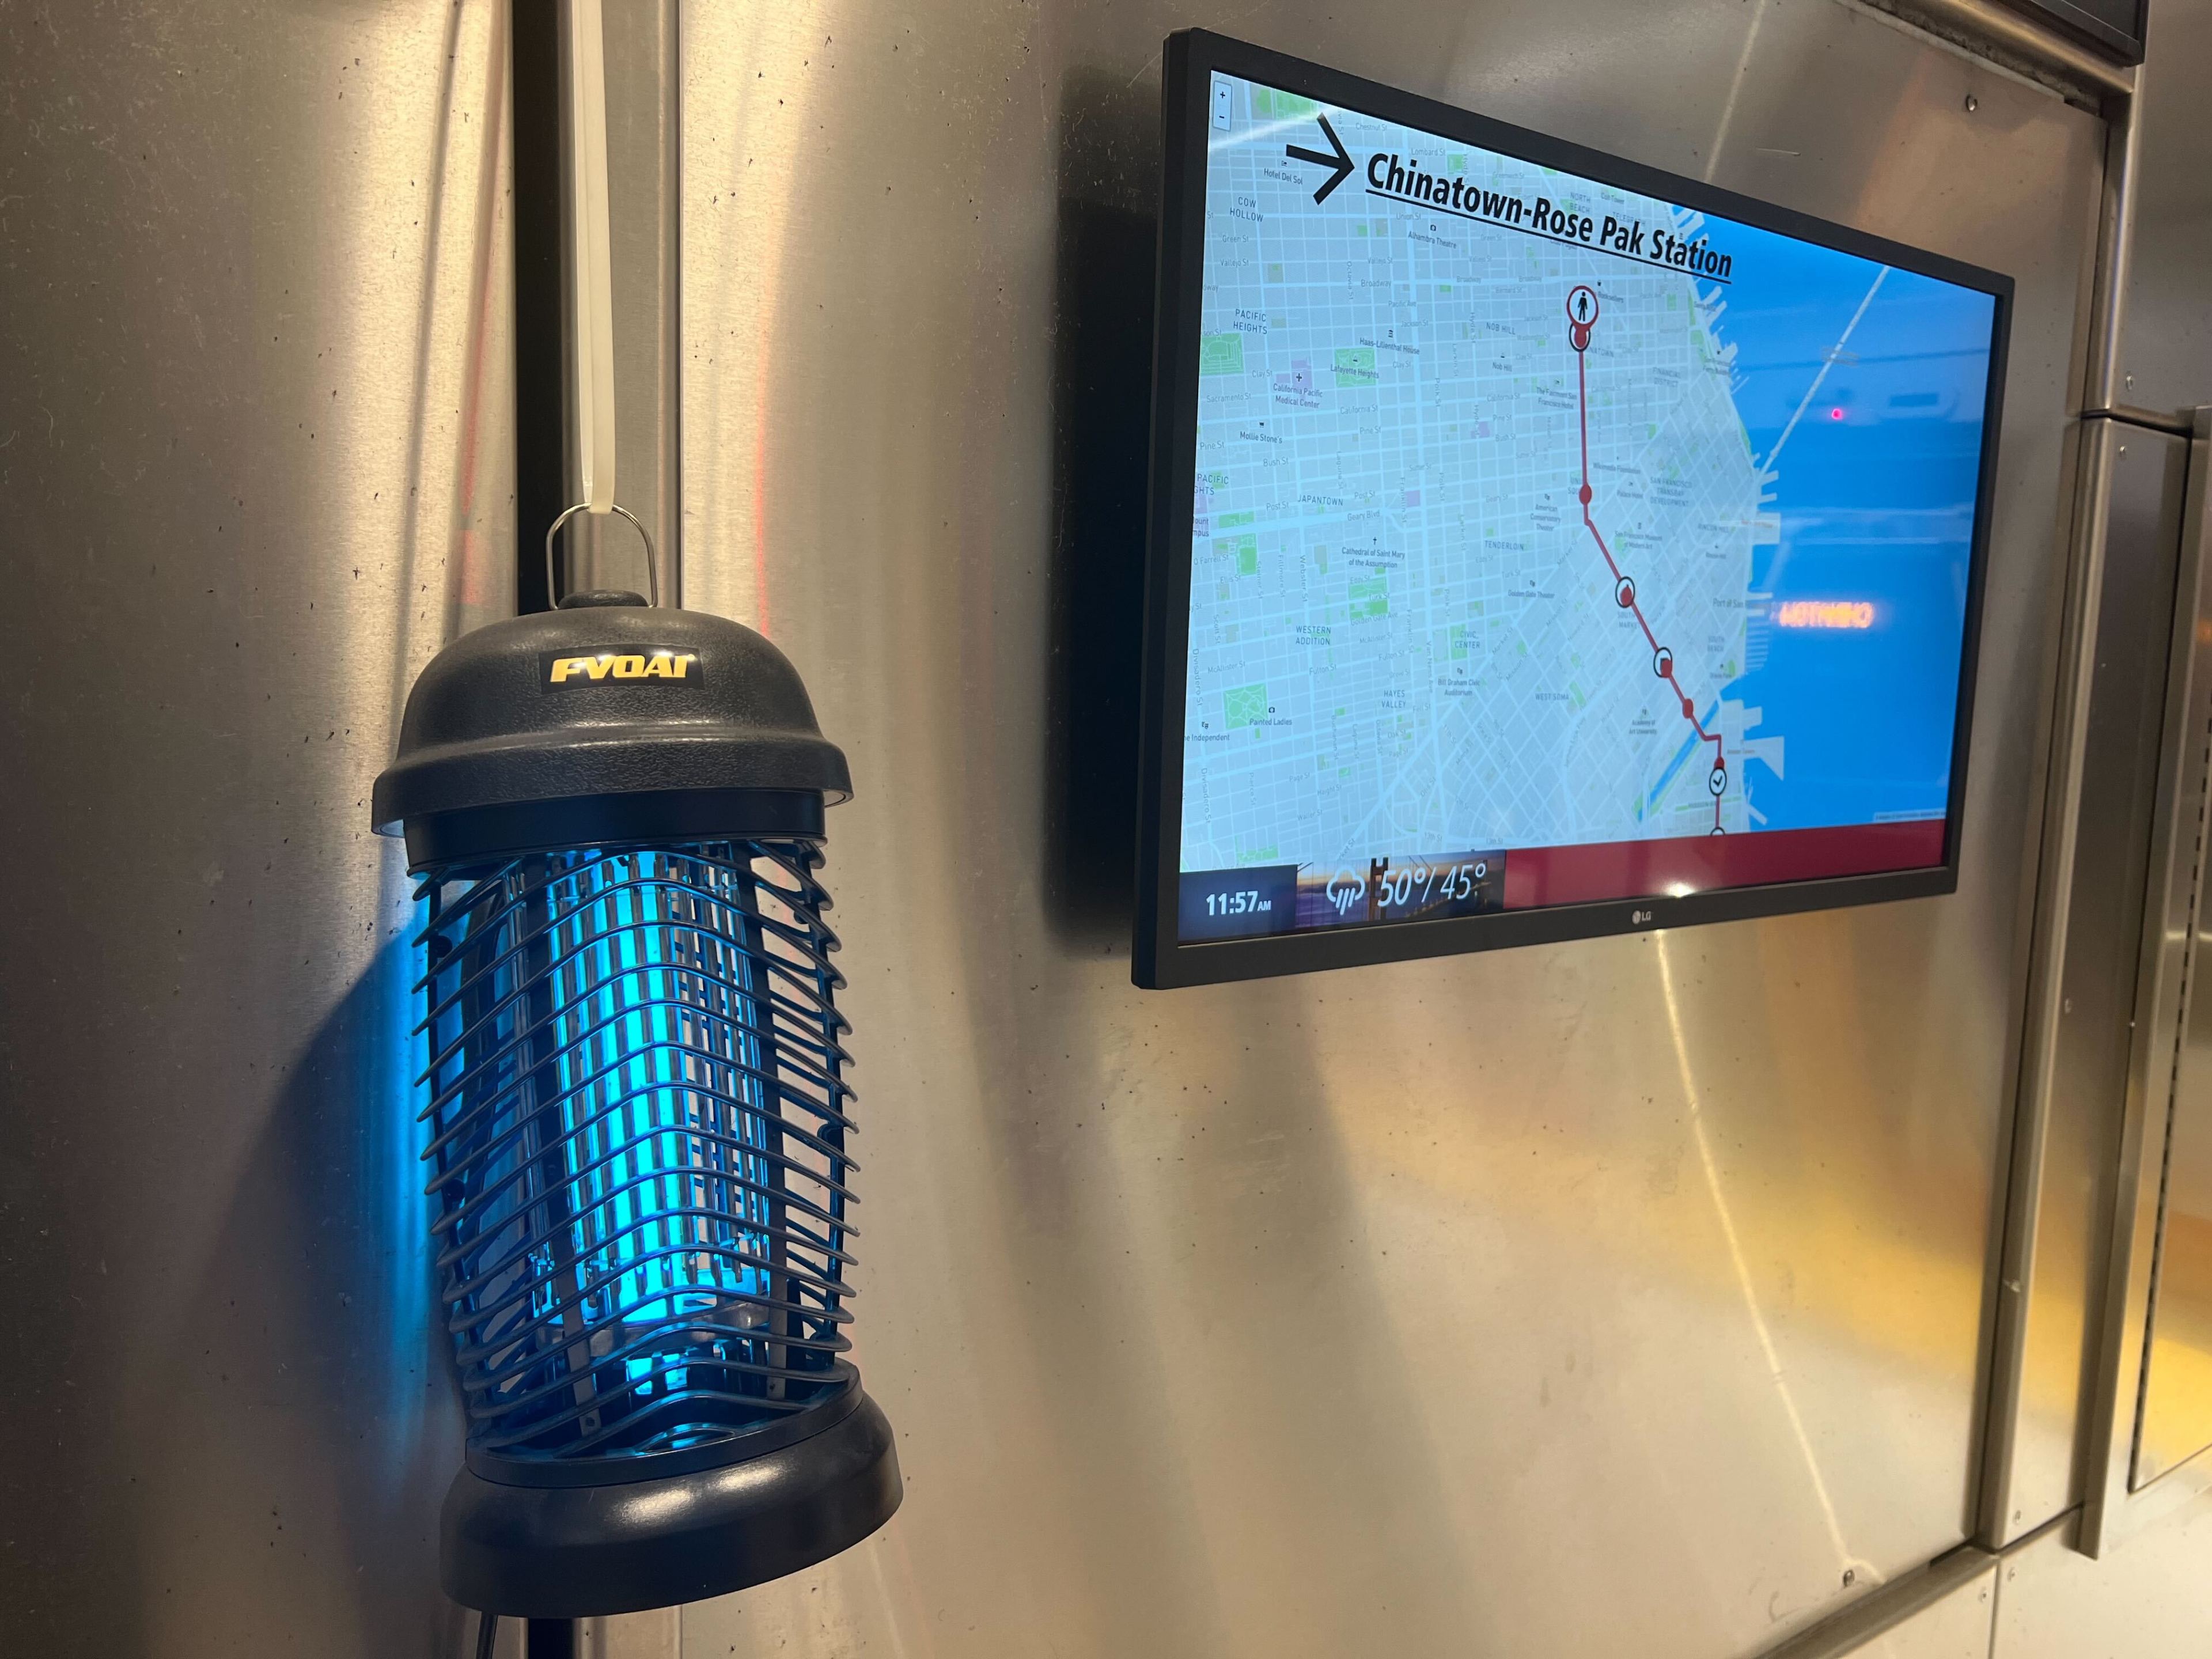 An indoor bug zapper hangs beside a digital screen displaying a transit map and the time/temp.